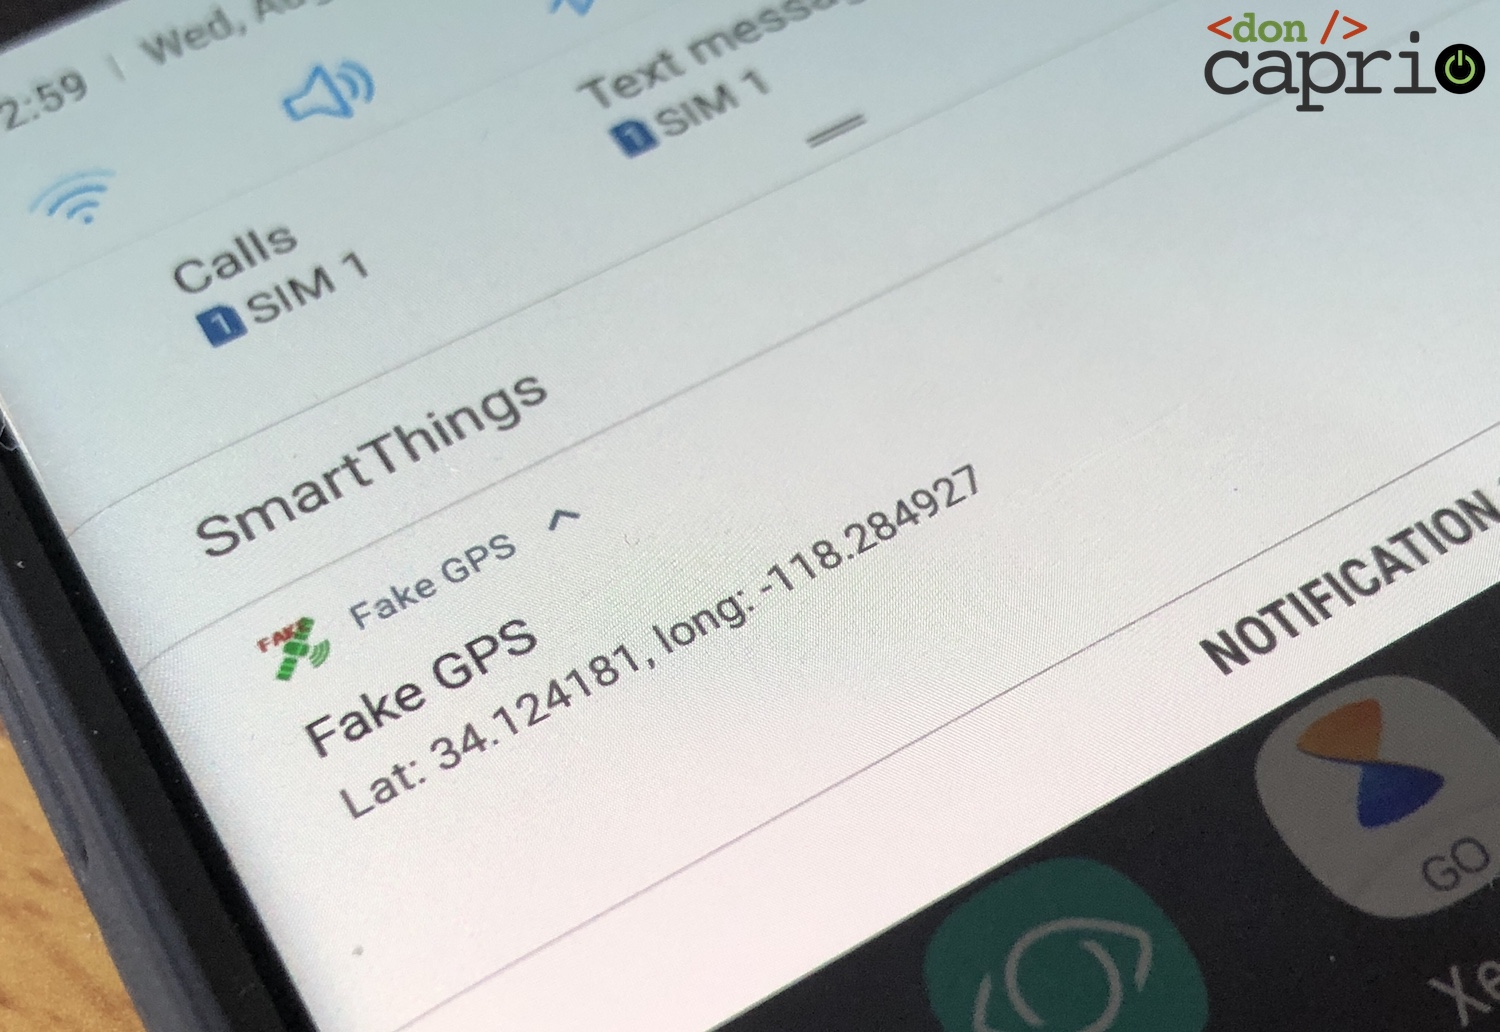 How to Fake Your GPS Location on Your Android